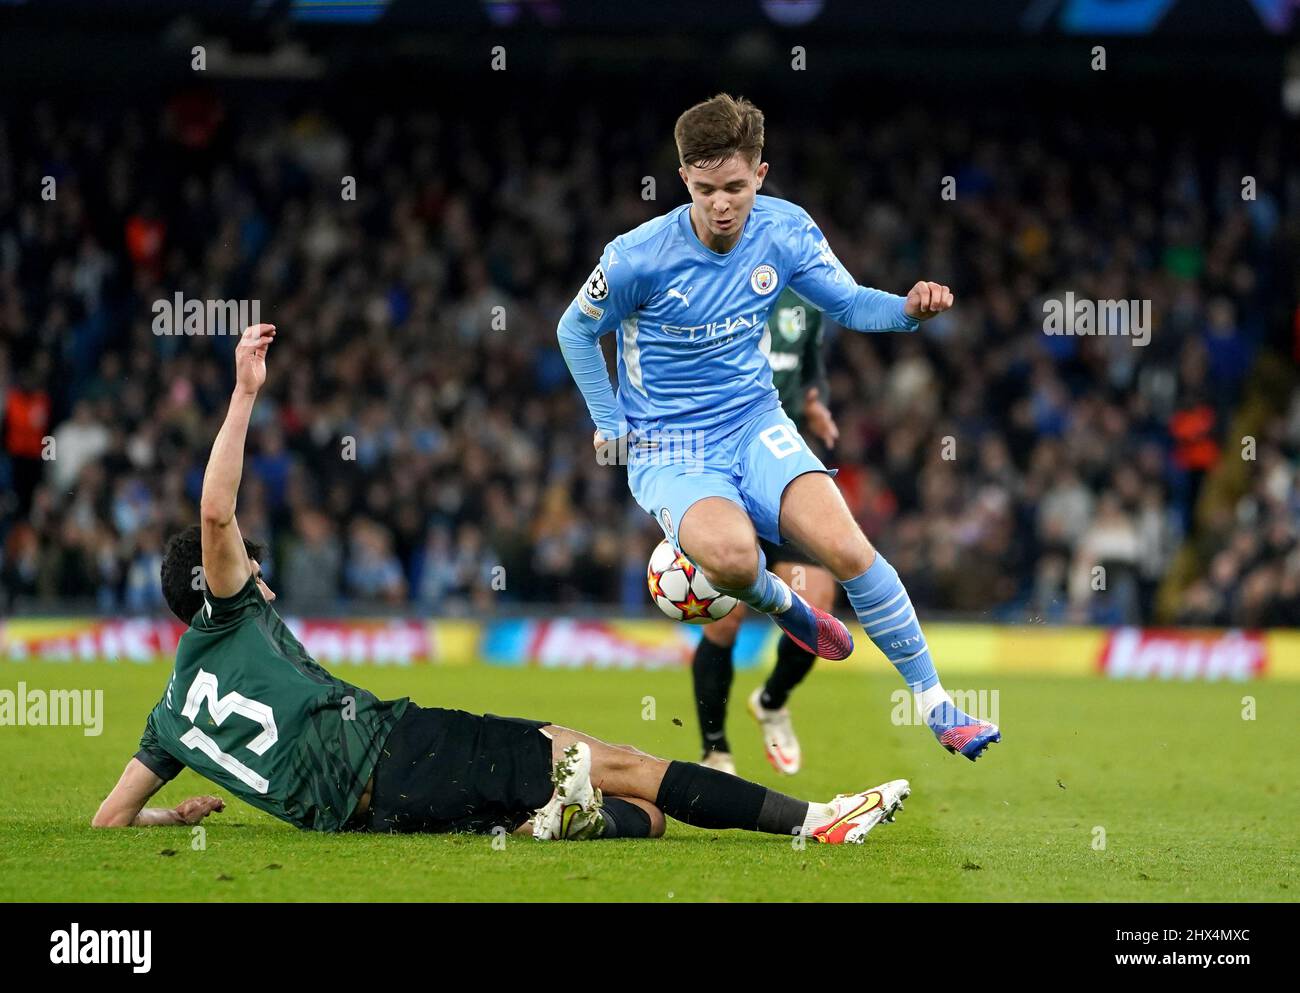 Sporting Lisbon's Luis Neto (left) and Manchester City's James McAtee battle for the ball during the UEFA Champions League round of sixteen second leg match at the Etihad Stadium, Manchester. Picture date: Wednesday March 9, 2022. Stock Photo